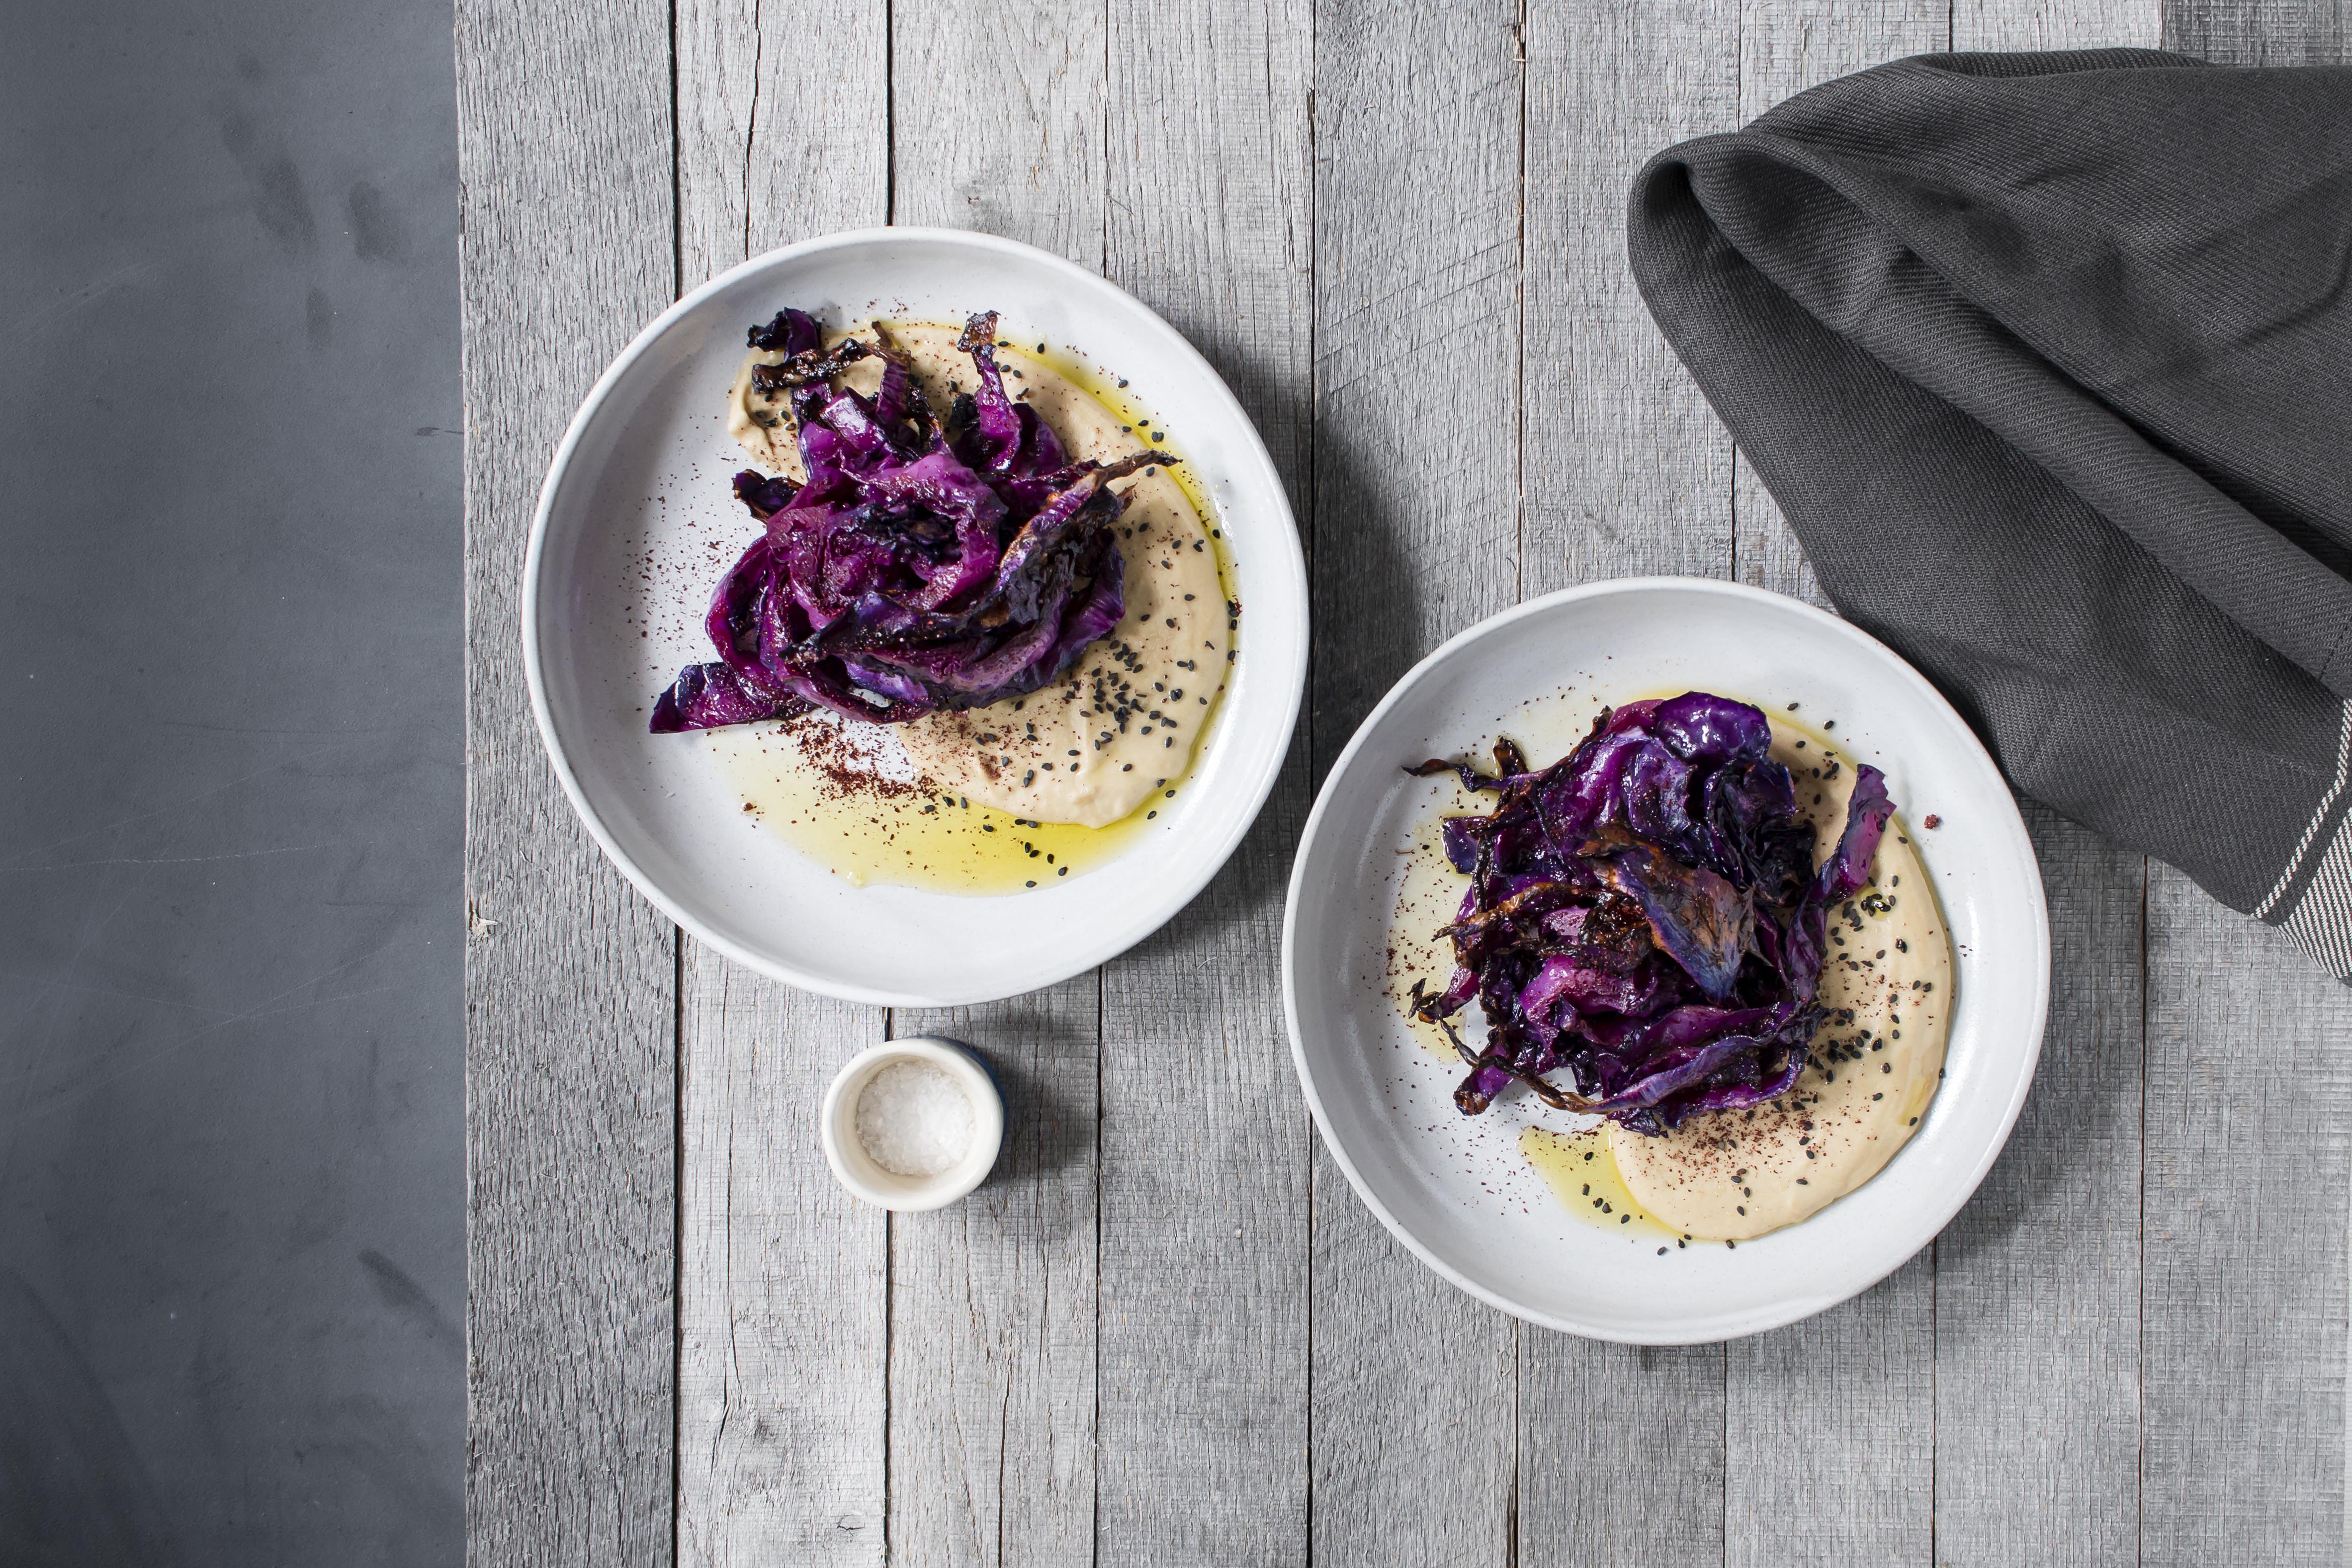 Homemade Hummus with Roasted Red Cabbage | I Will Not Eat Oysters